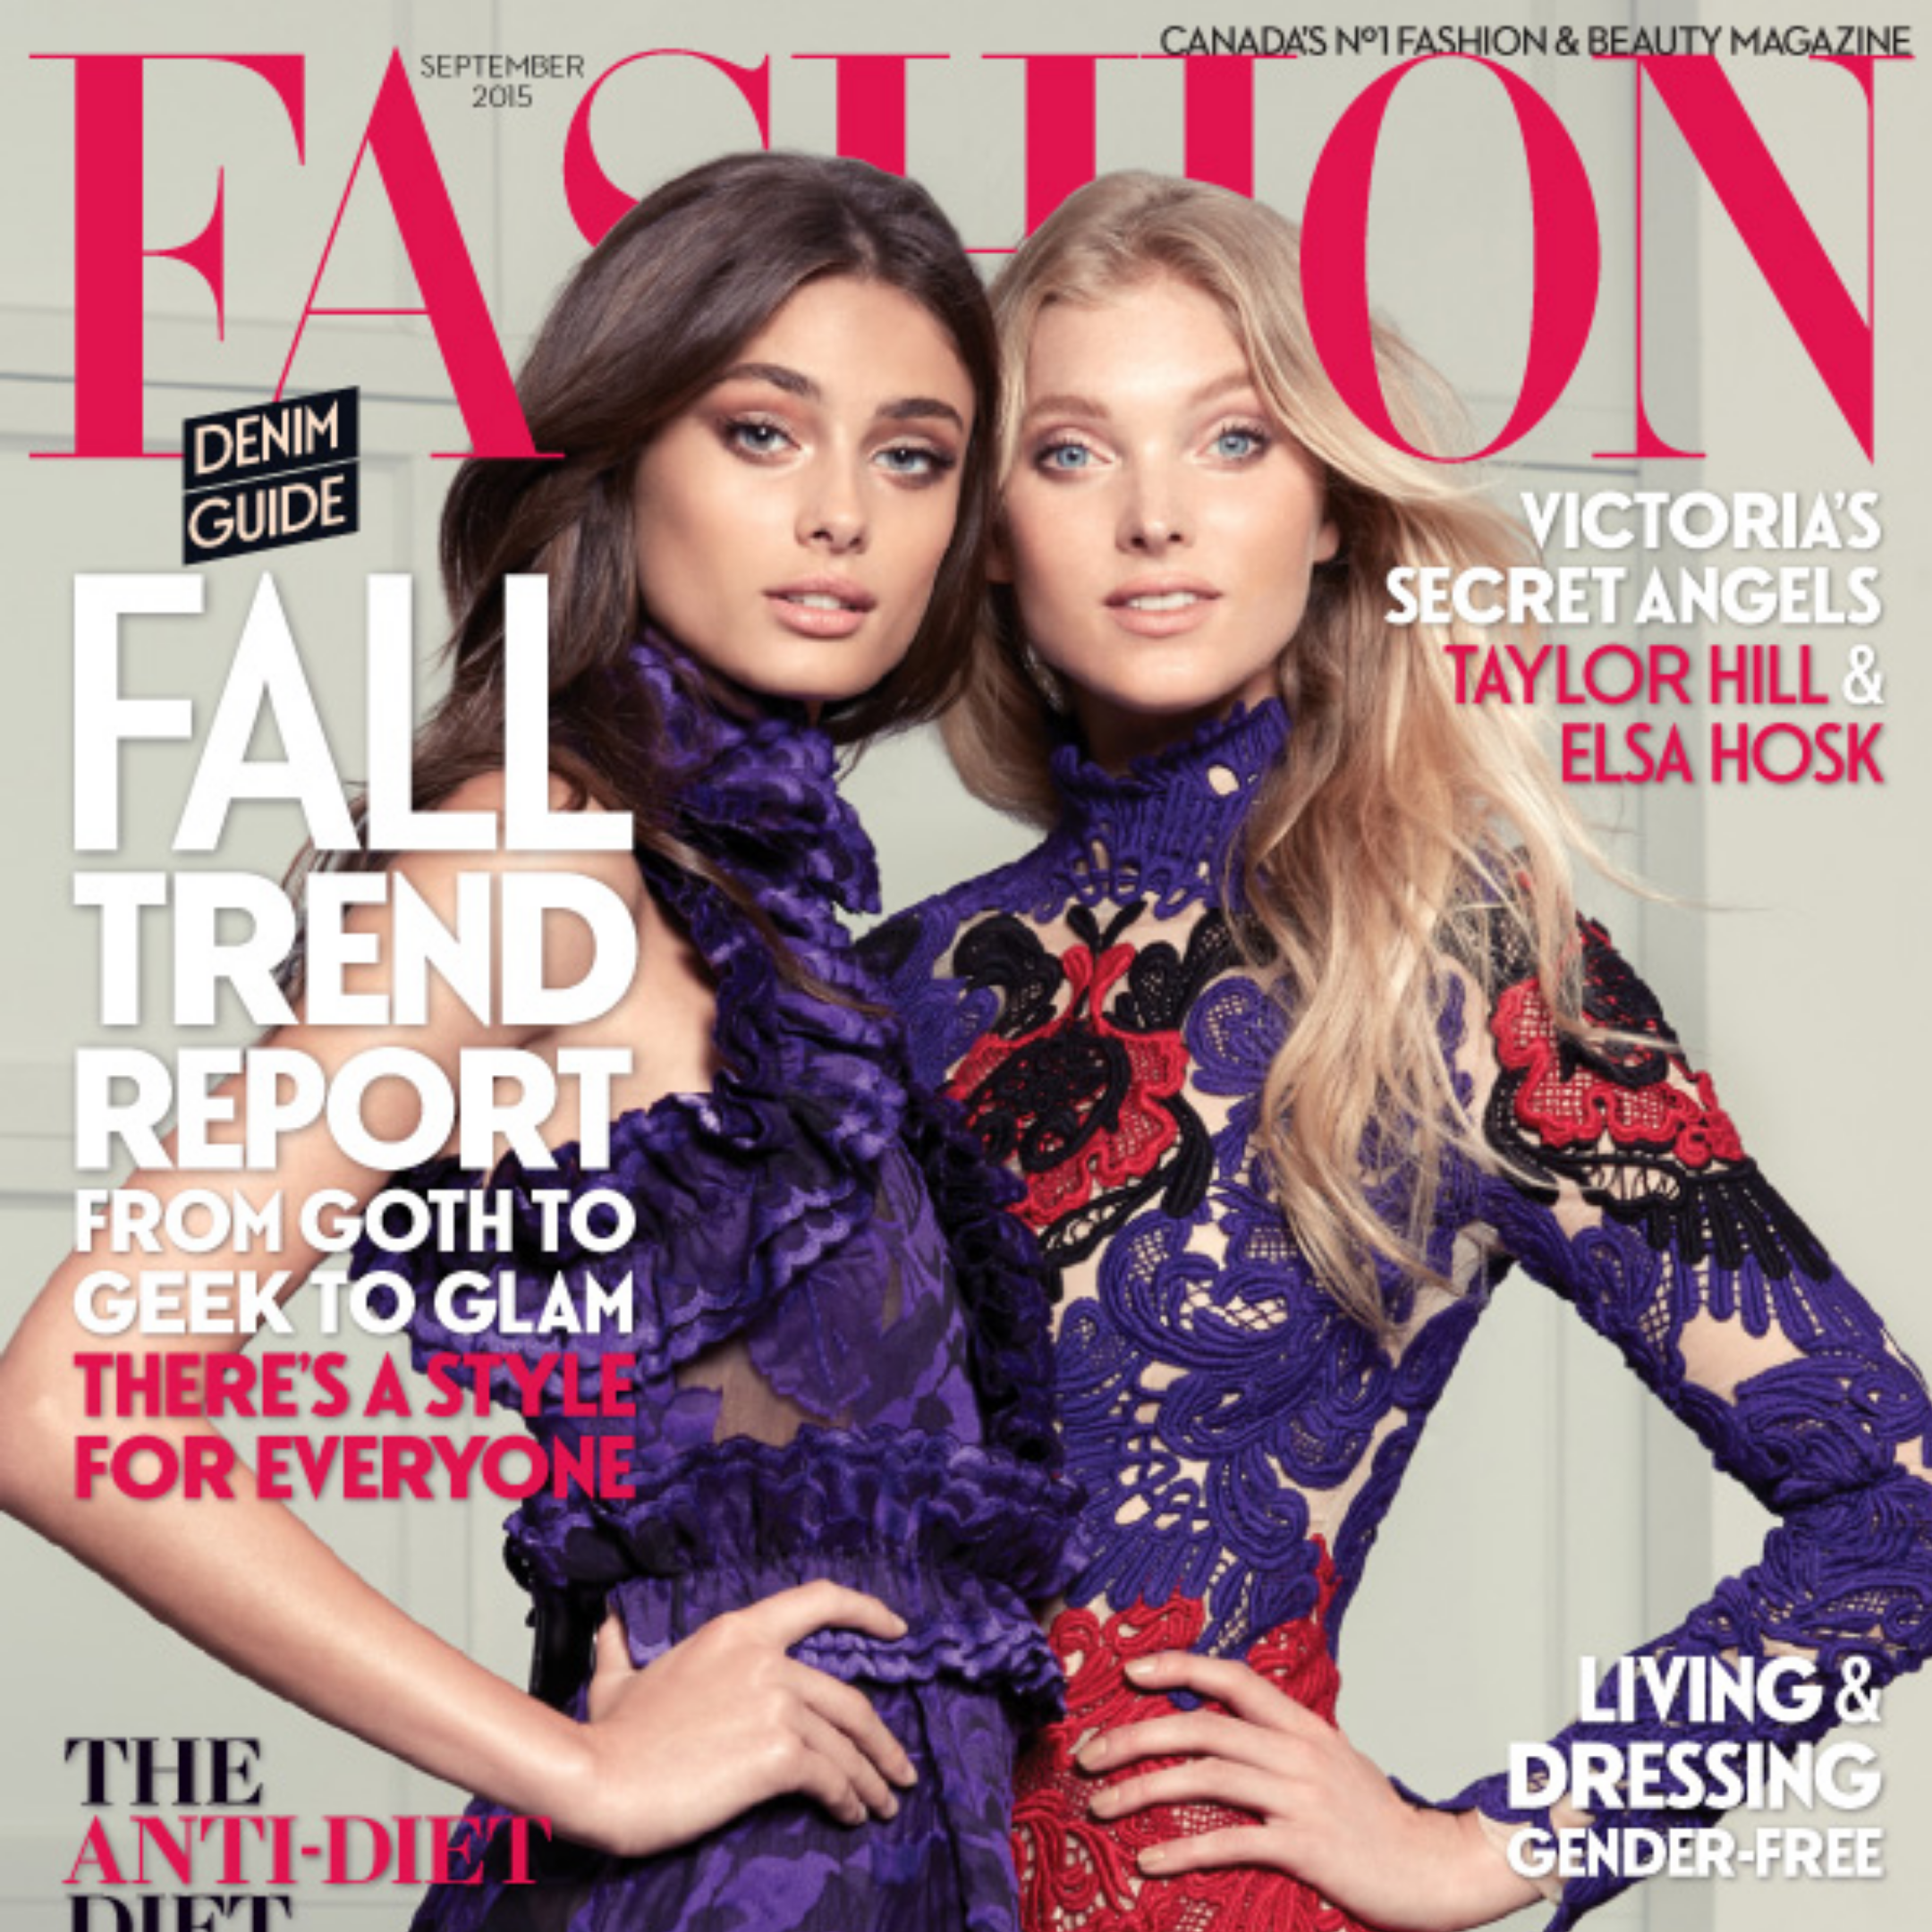 Fashion Magazine mentions Blitz Facial Bar in their September 2015 issue.